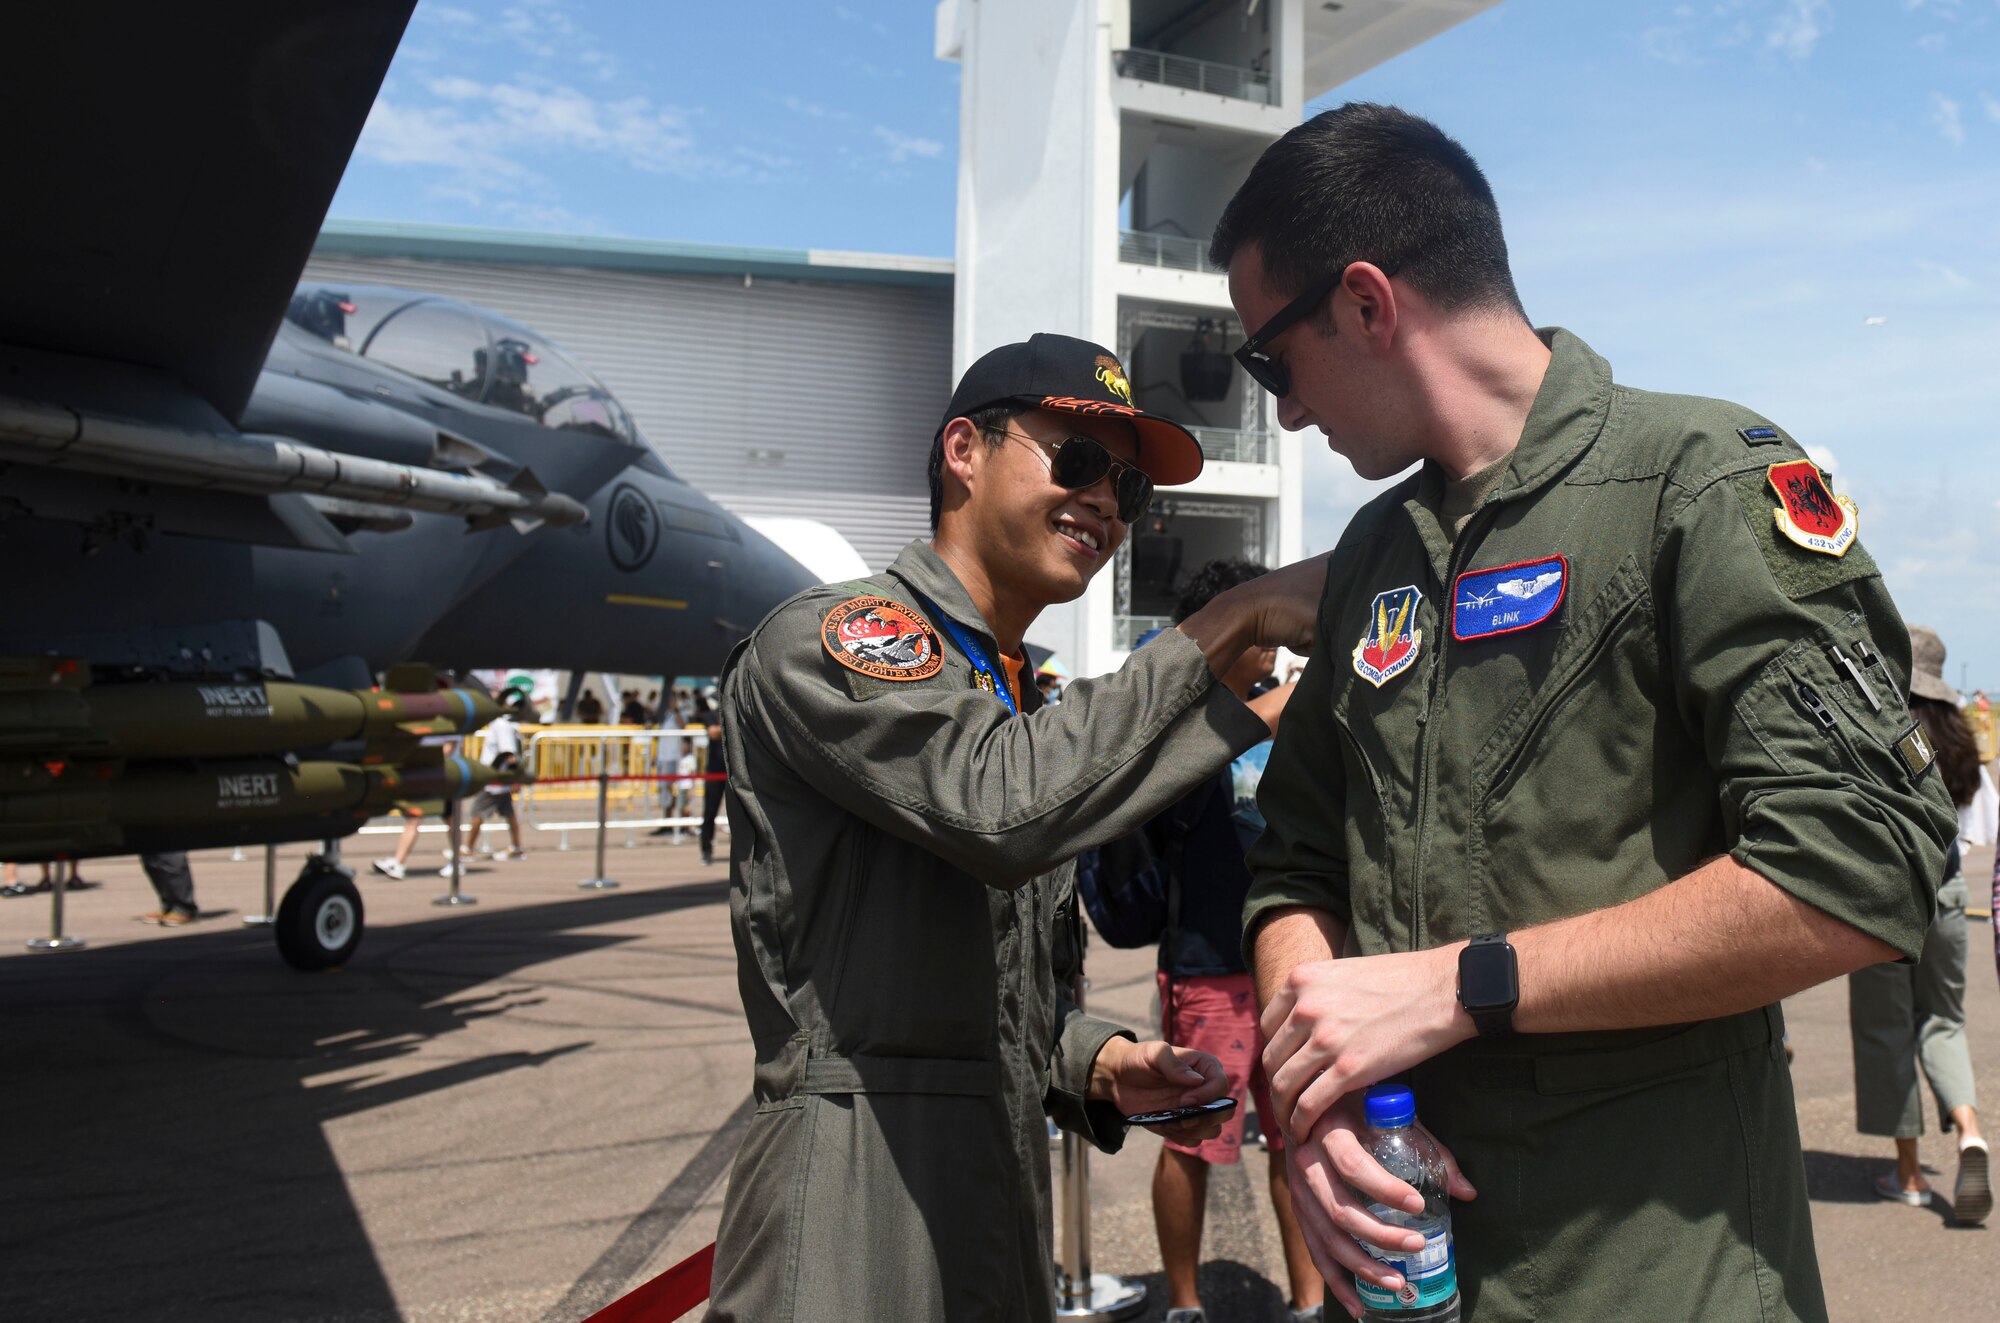 Pilots trade patches at Singapore Airshow.